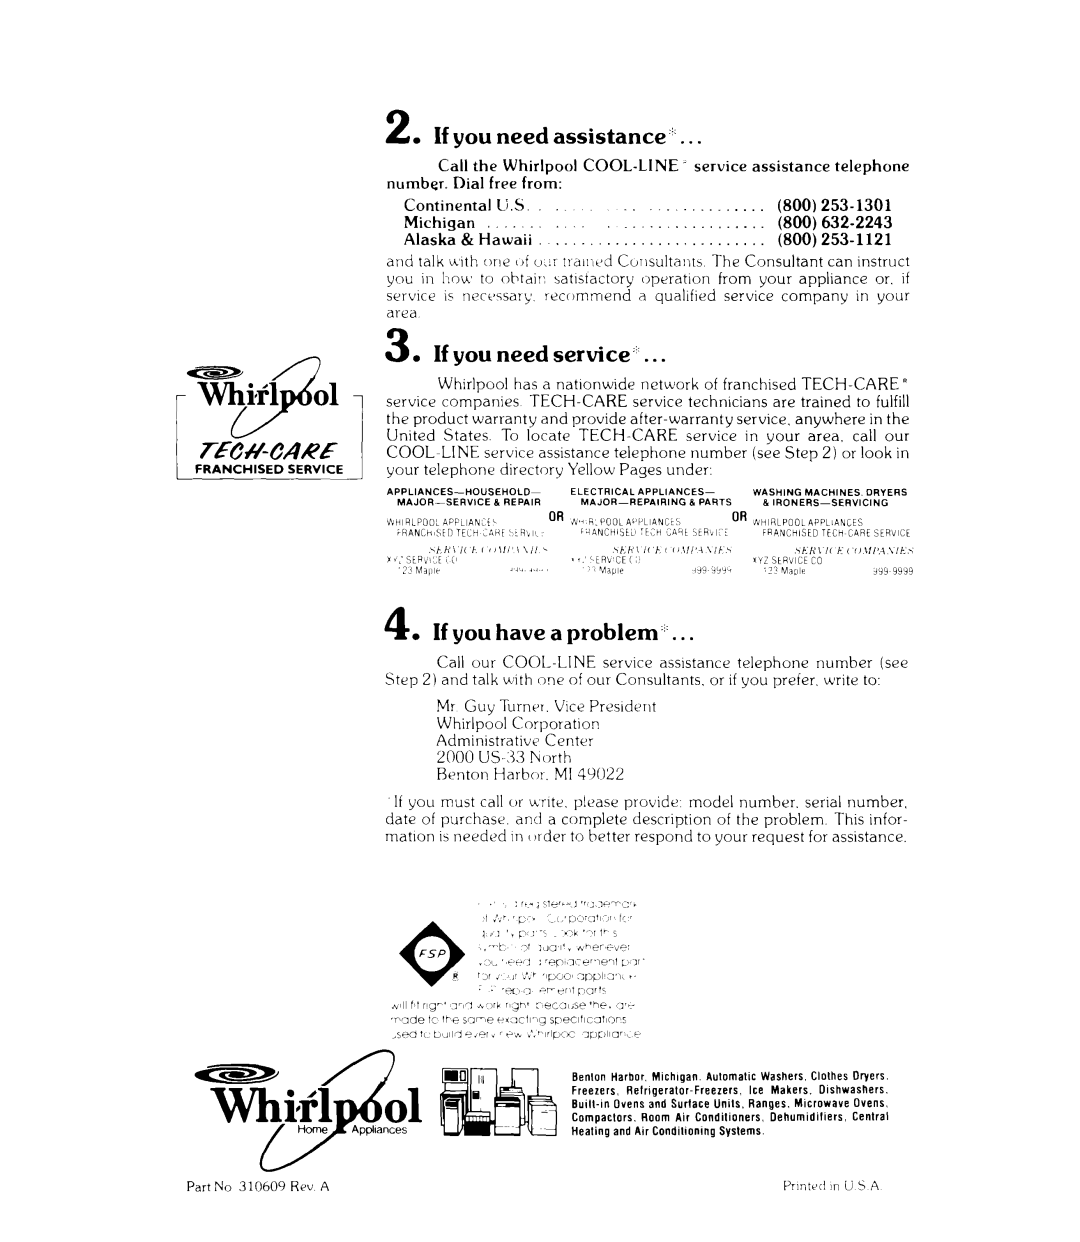 Whirlpool RJE-385P manual If you need assistance ‘, If you need service+, If you have a problem ‘ 